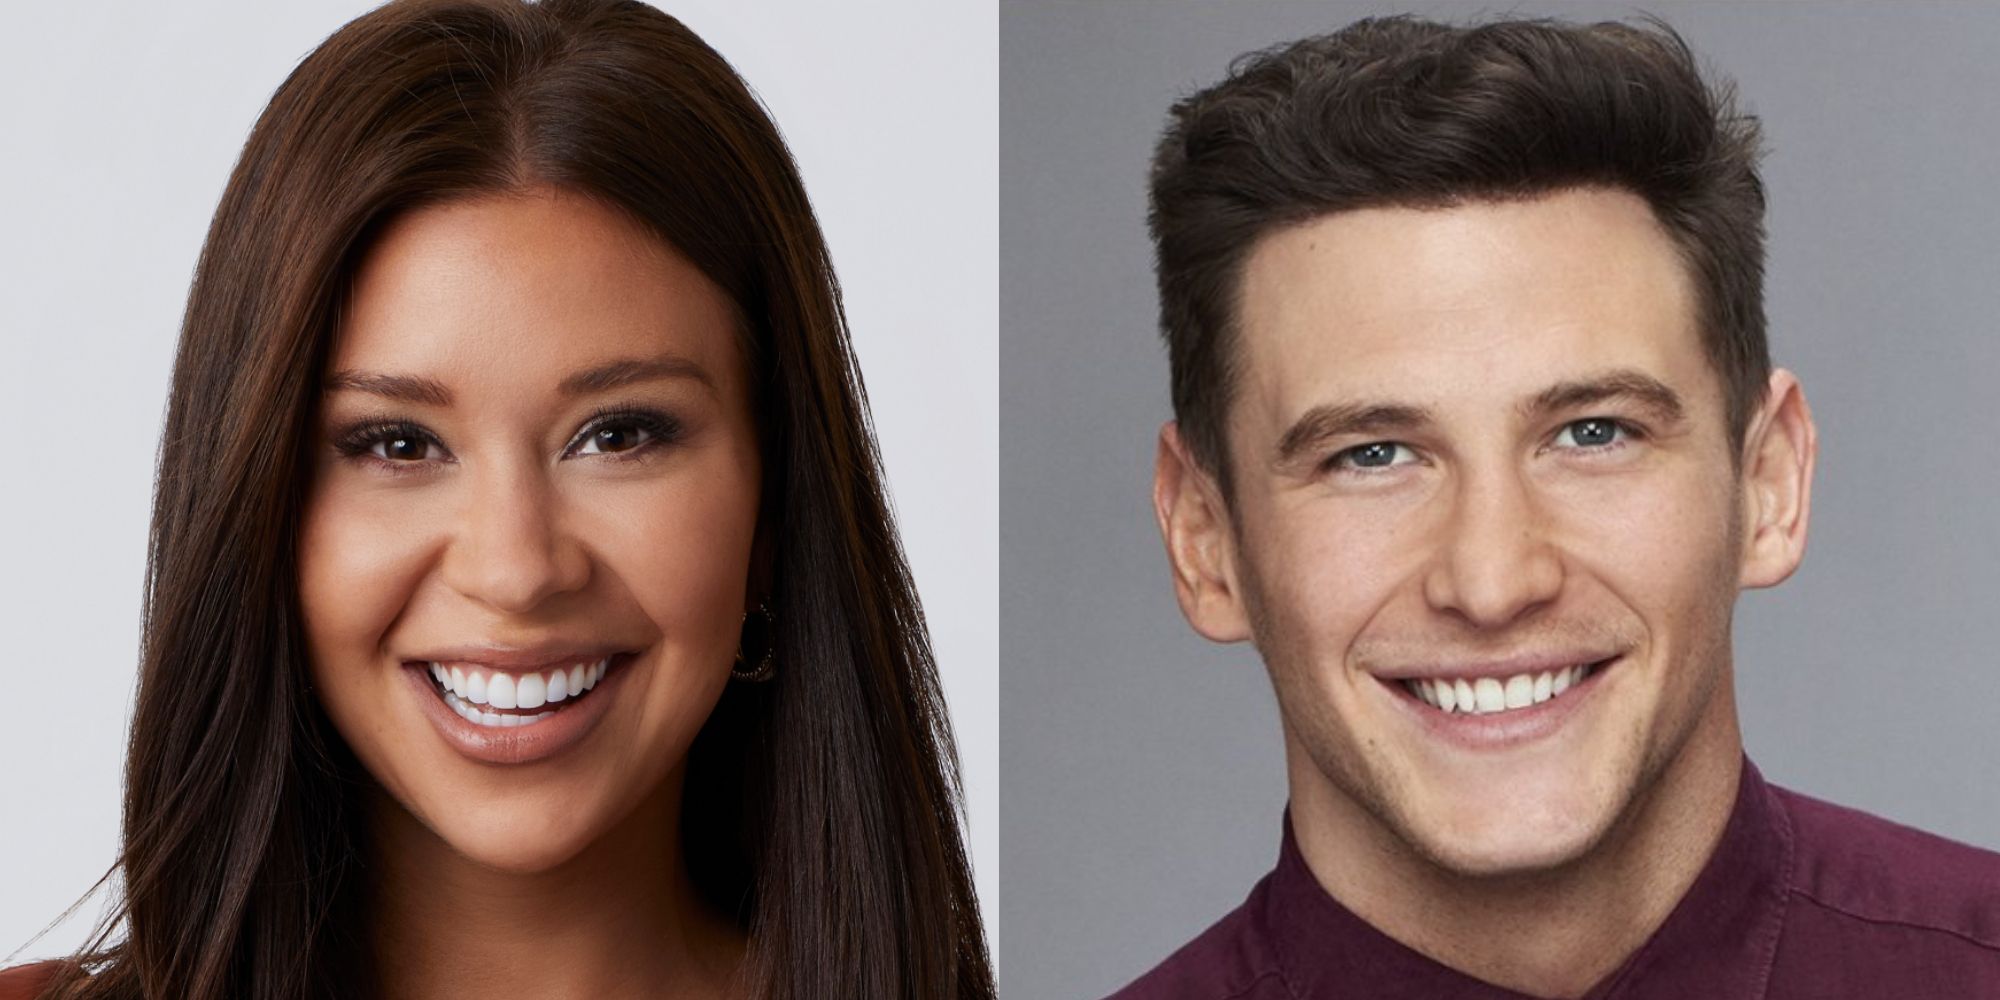 Gabby Windey and Blake Horstmann from The Bachelor franchise